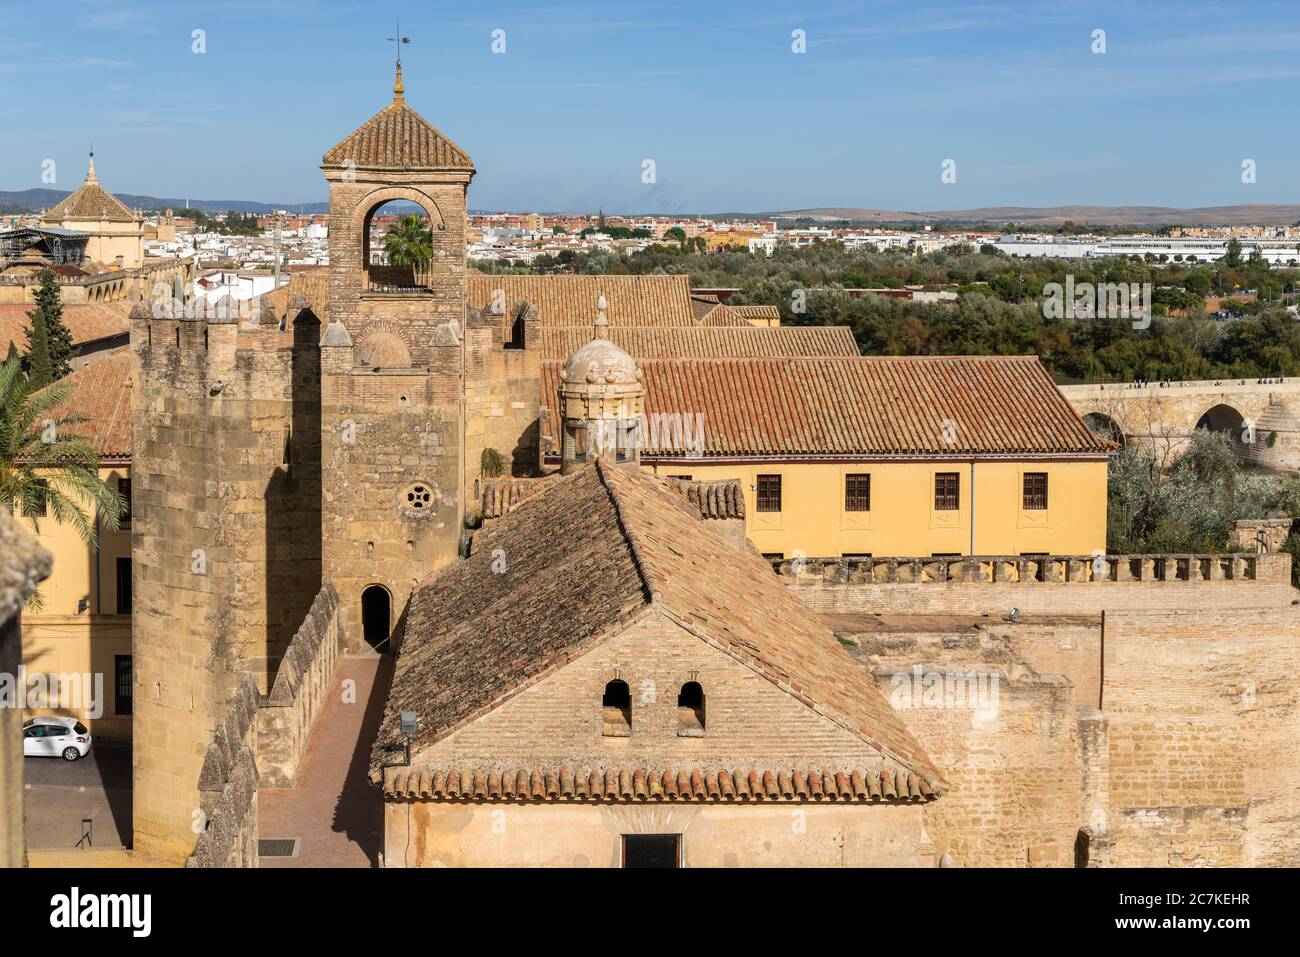 The 14th century crenelated wall and Tower of Homage (or Clock Tower) of the historic Alcázar de los Reyes Cristianos in Cordoba Stock Photo